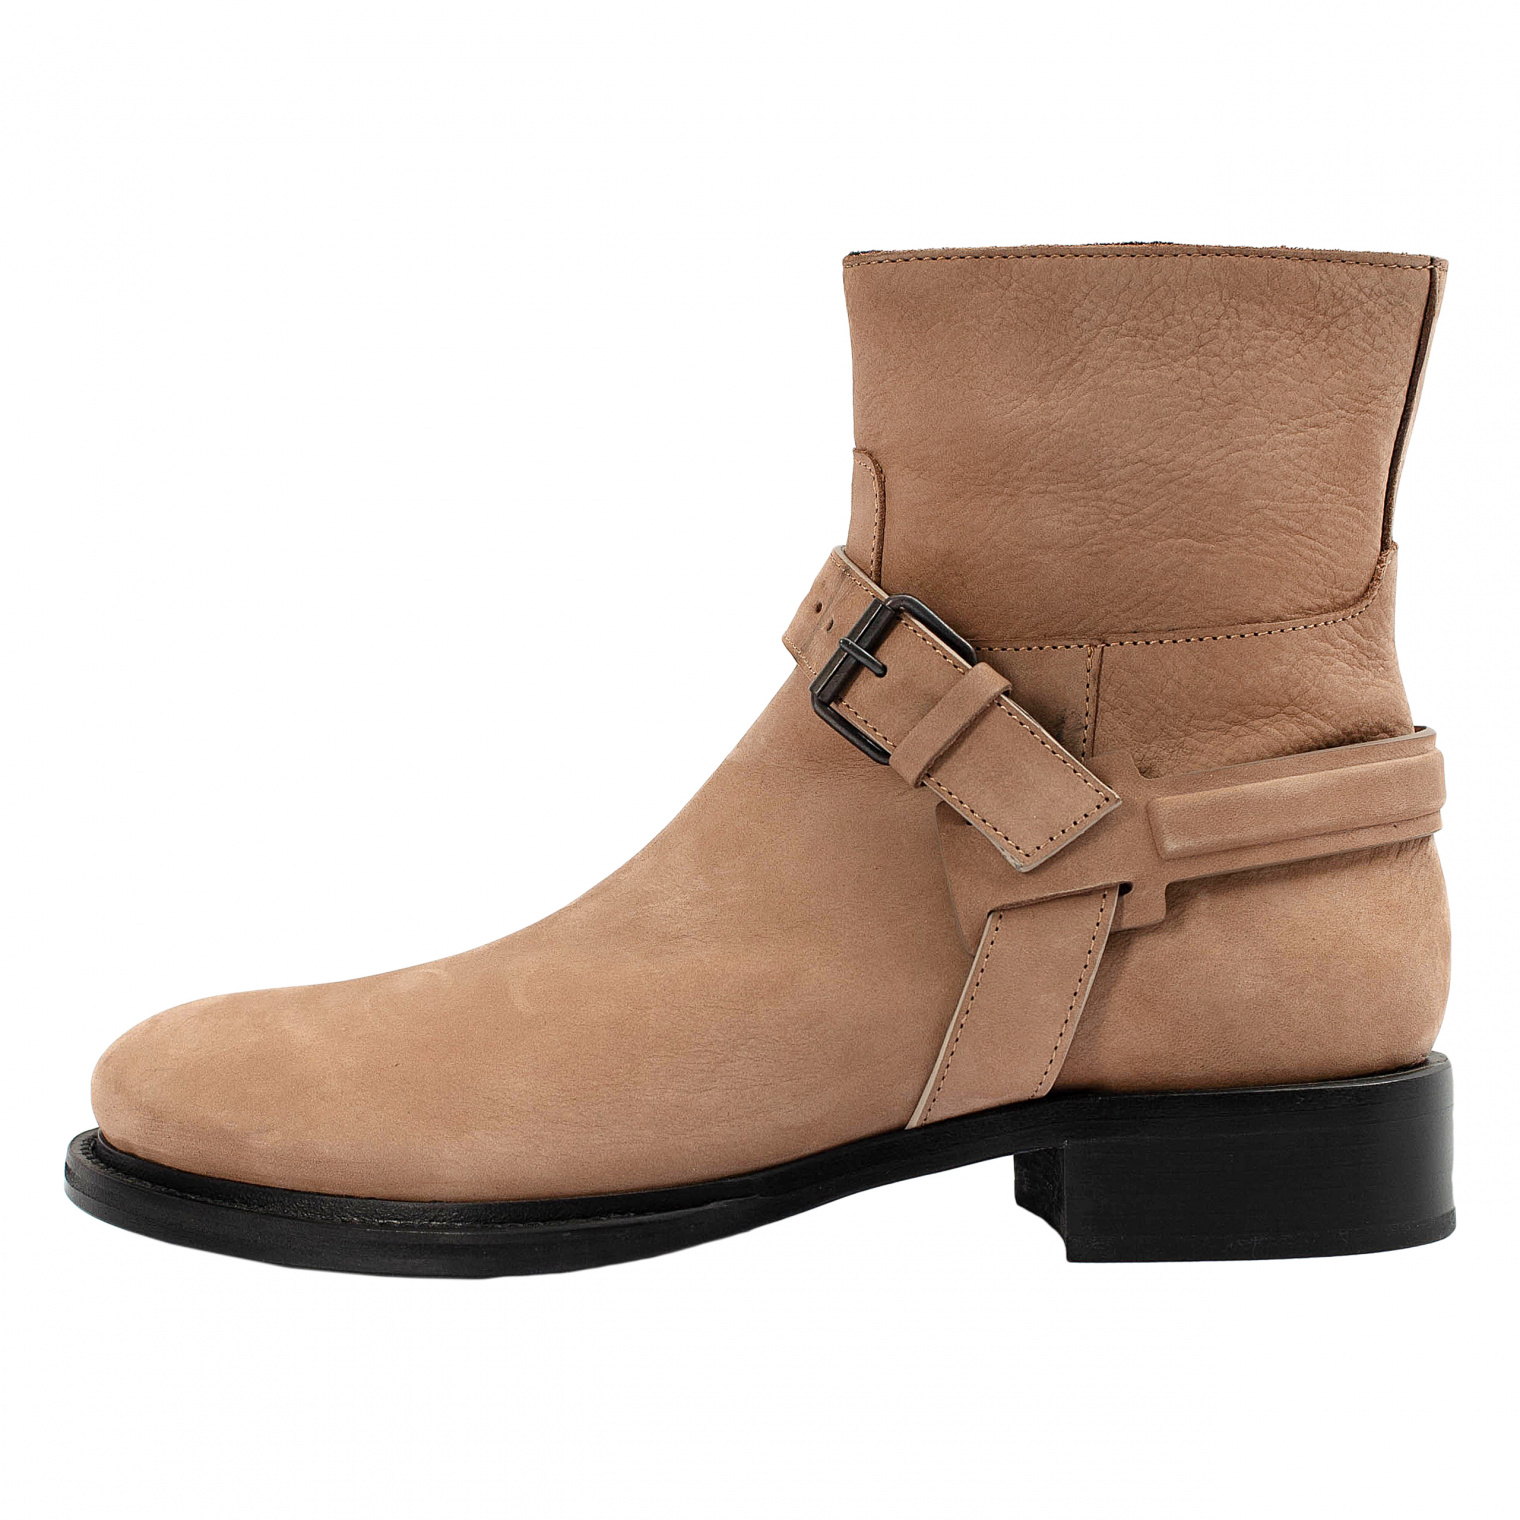 Ann Demeulemeester Suede Ankle Boots